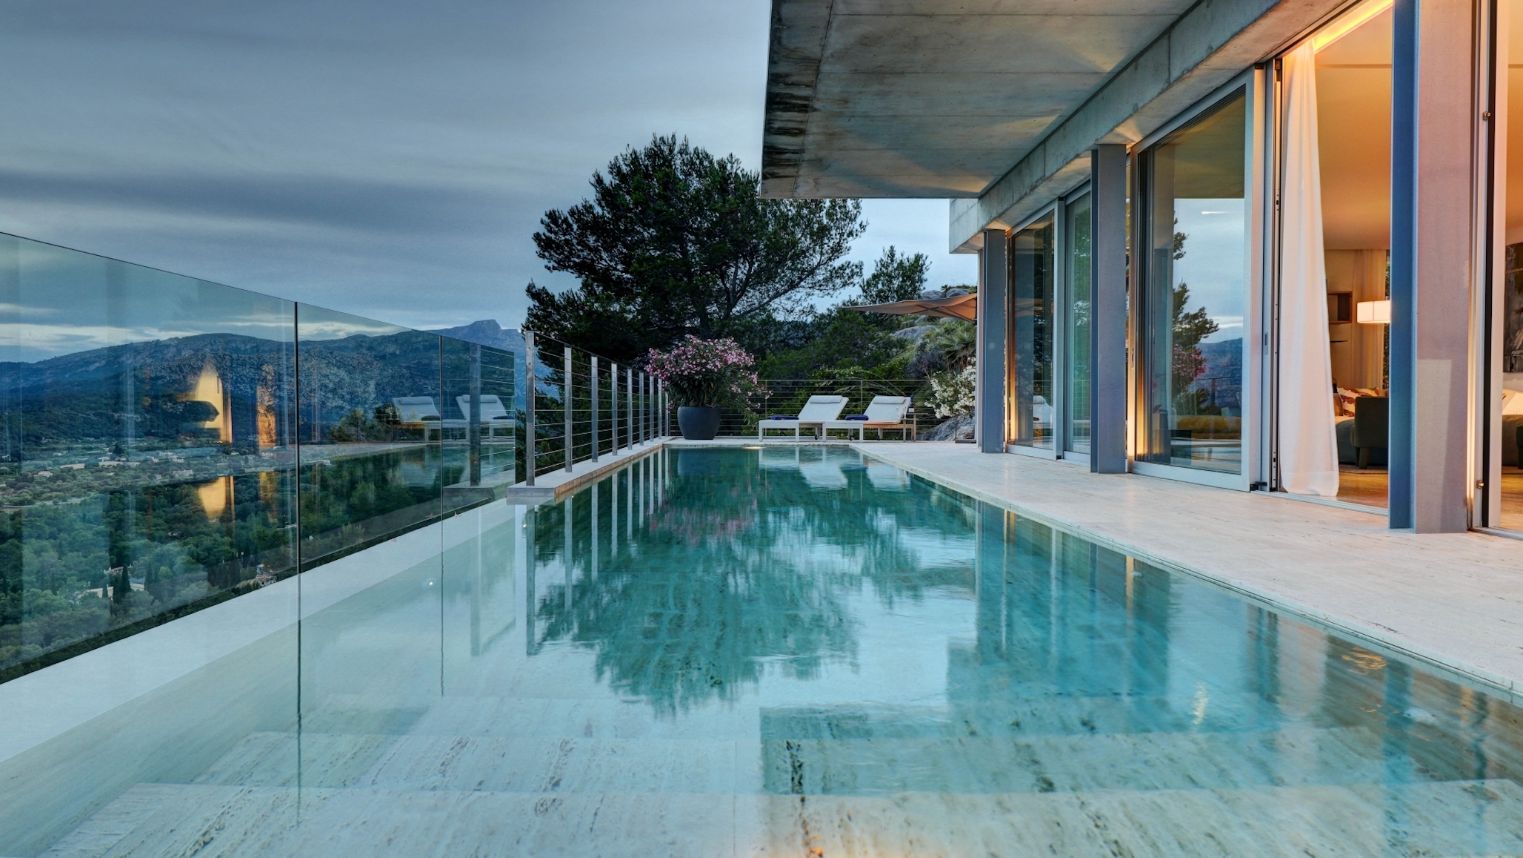 Spectacular luxury holiday villa in Pollensa Mallorca with breathtaking views